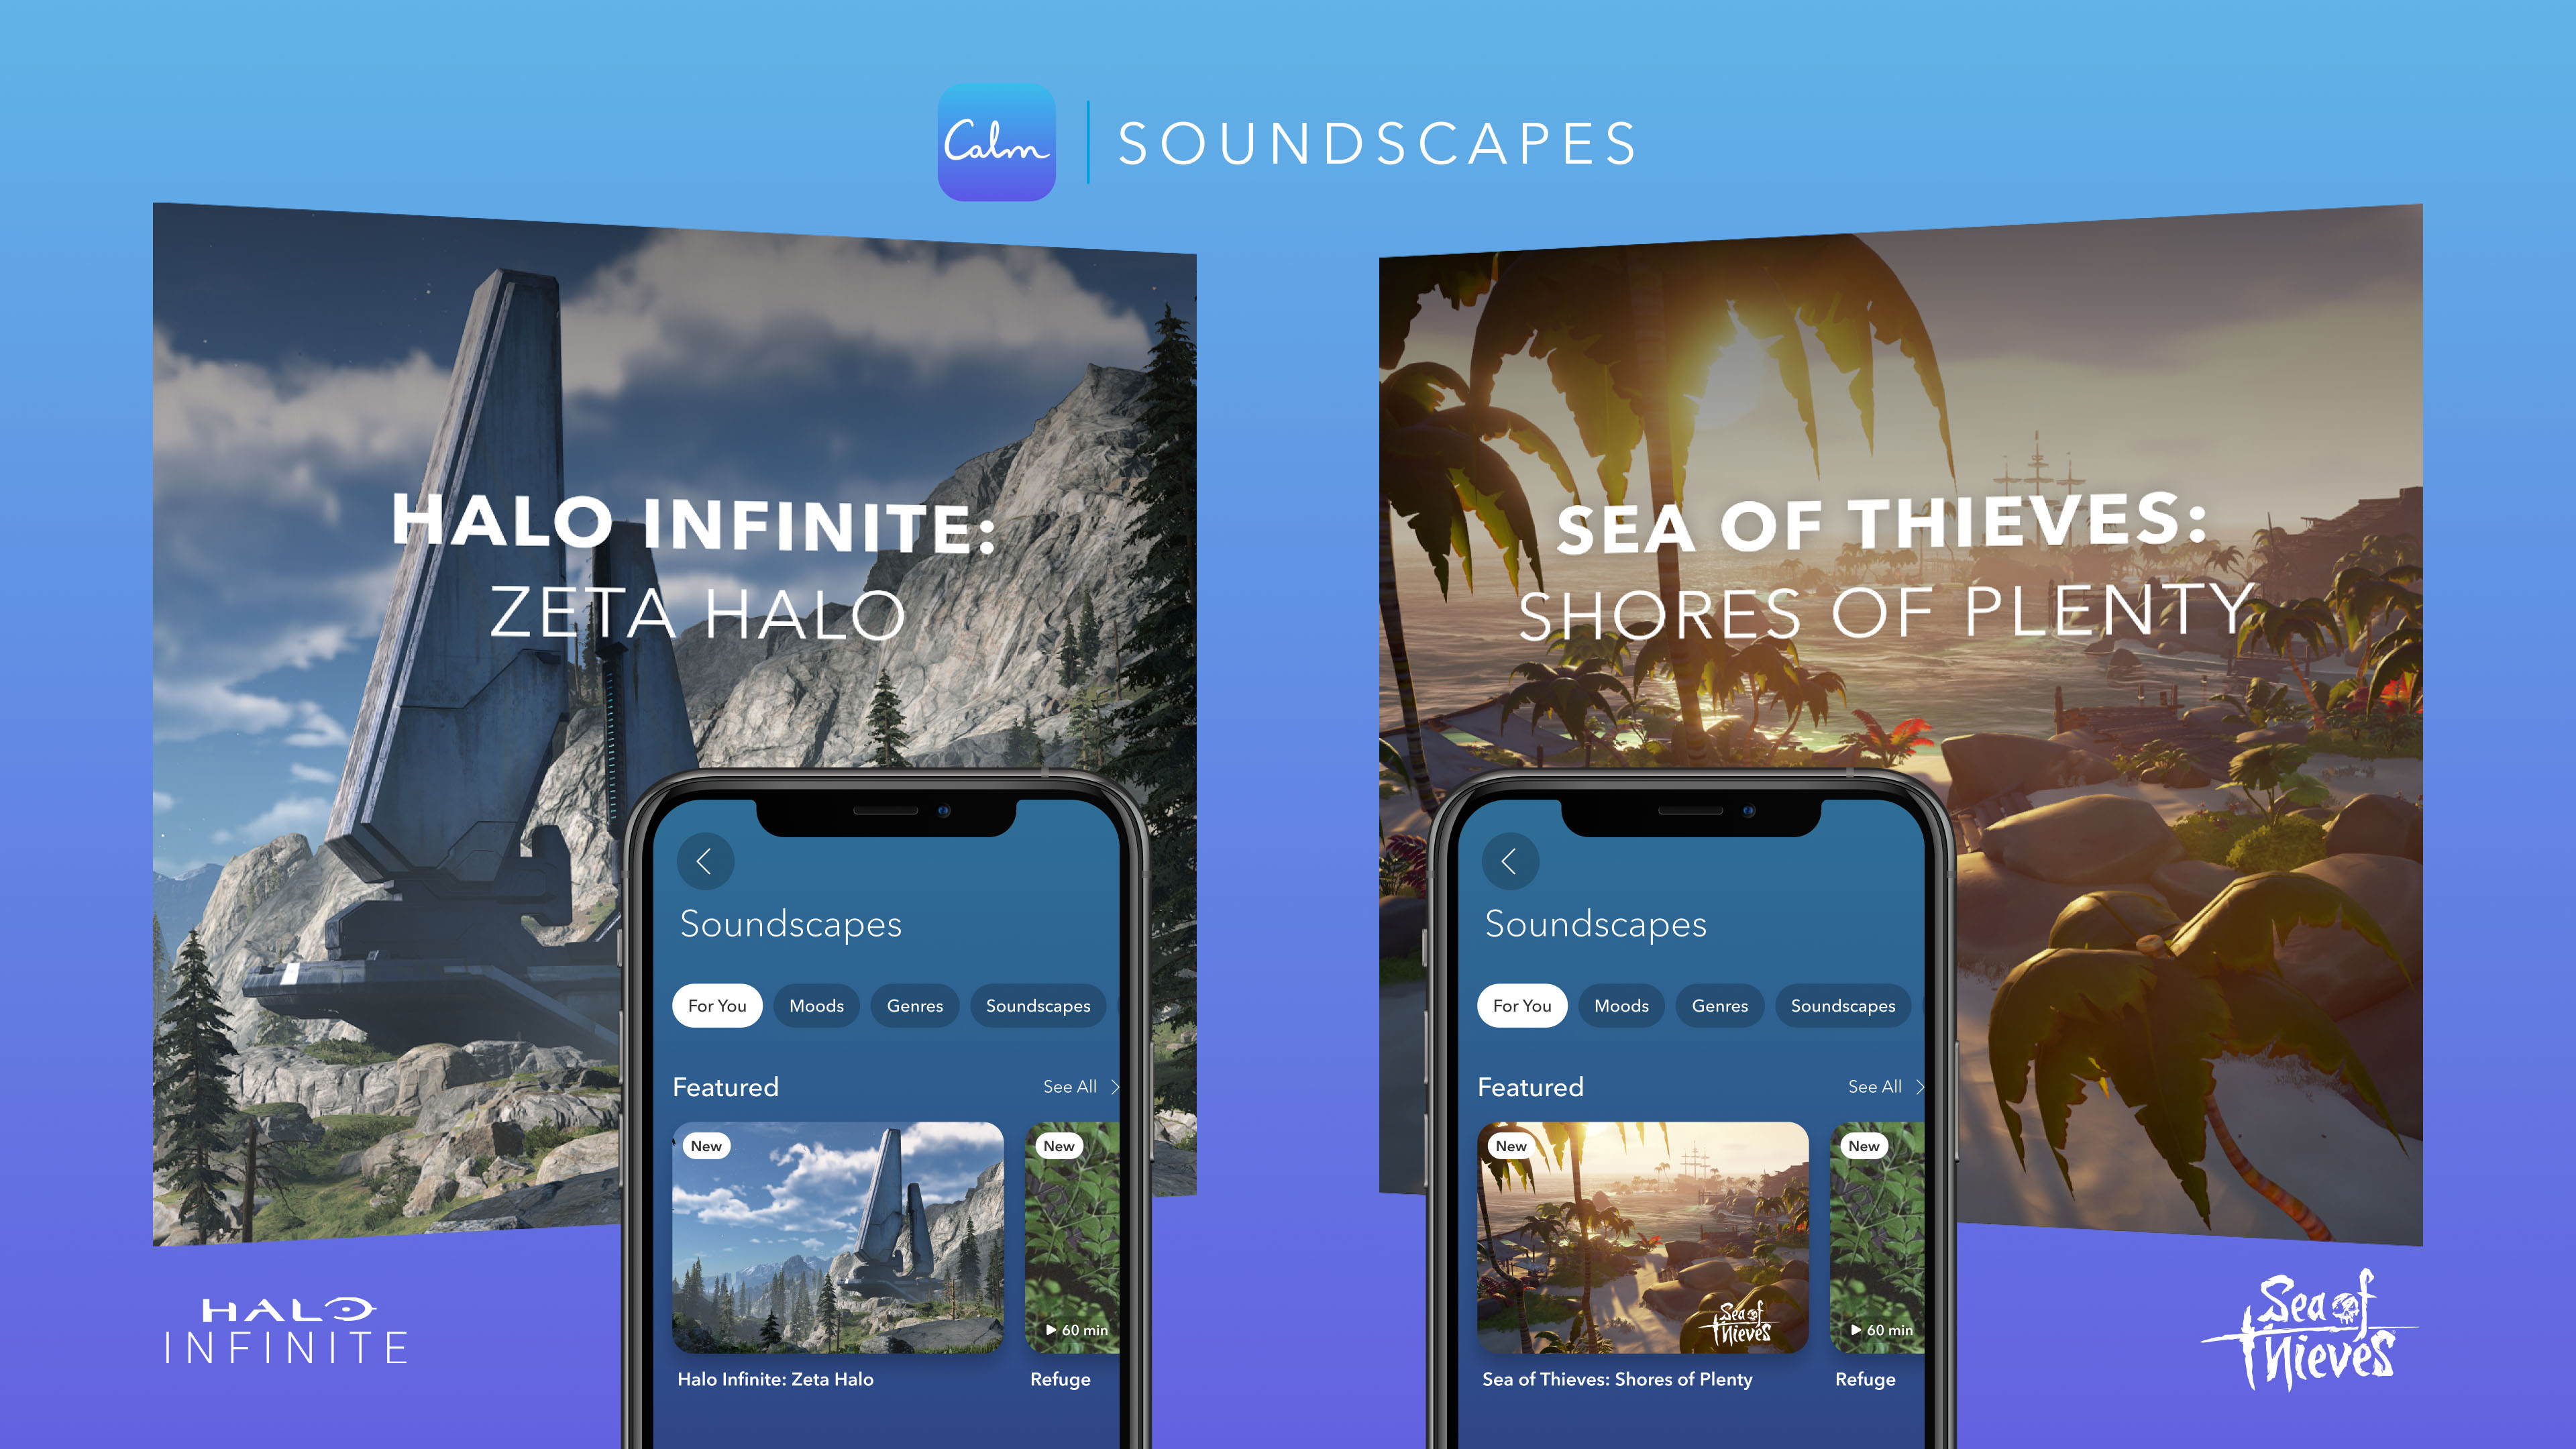 Calm Soundscapes promotion featuring two mobile screens showing soundscapes for Halo Infinite: Zeta Halo on a futuristic mountain landscape and Sea of Thieves: Shores of Plenty on a beach background with palm trees.